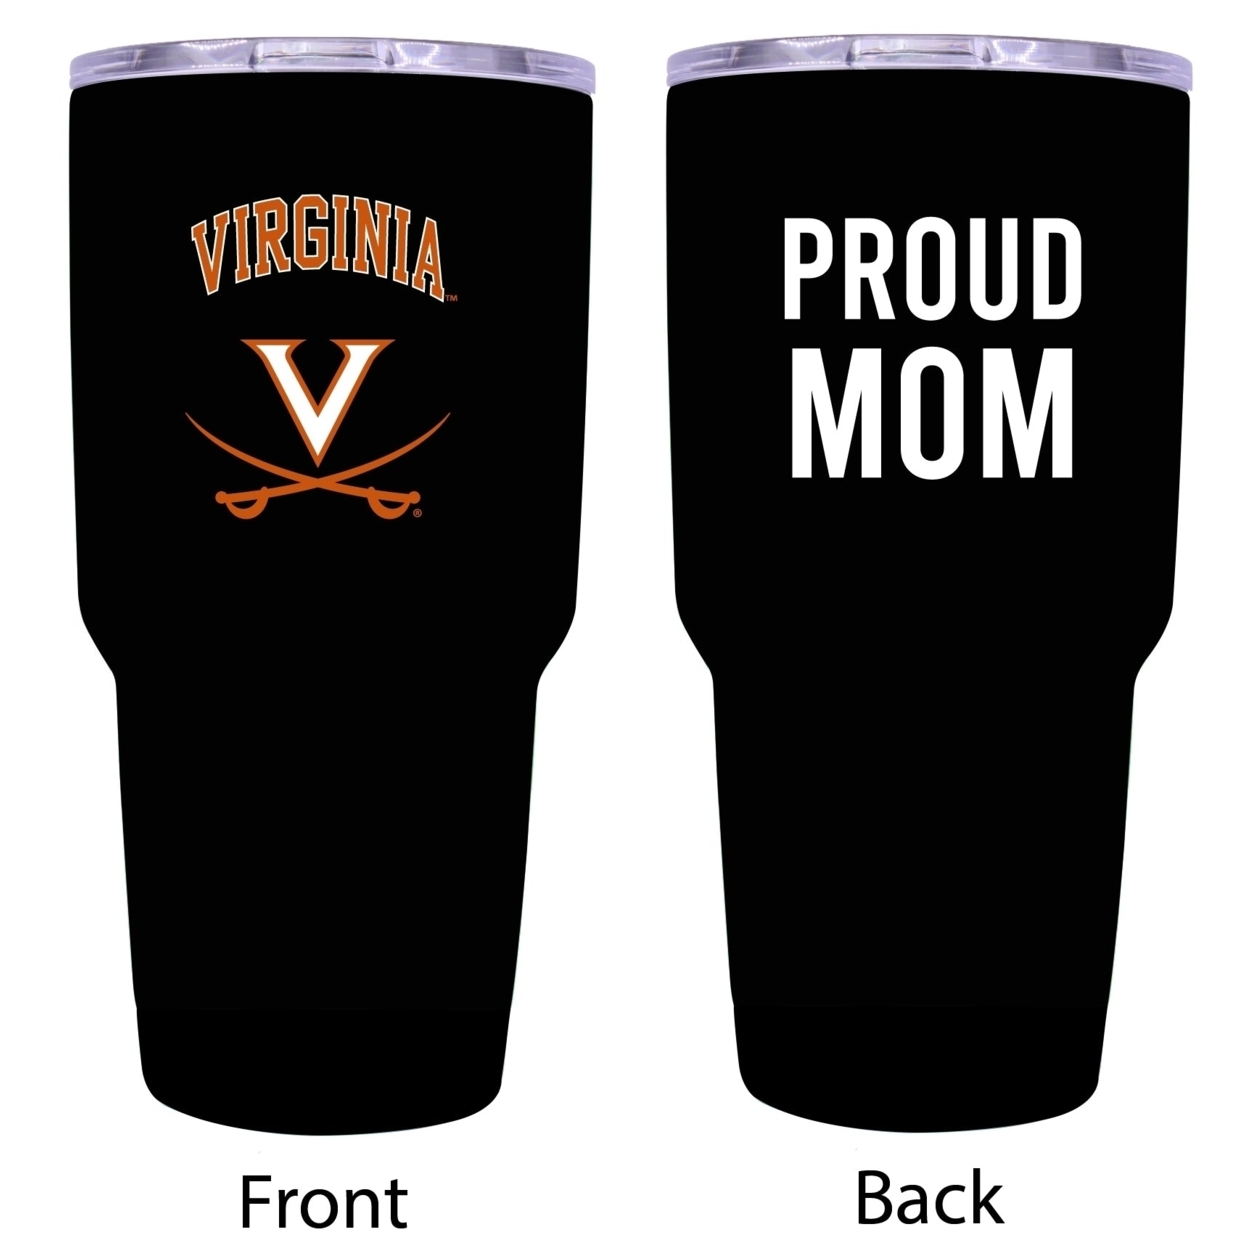 Virginia Cavaliers Proud Mom 24 Oz Insulated Stainless Steel Tumblers Choose Your Color.